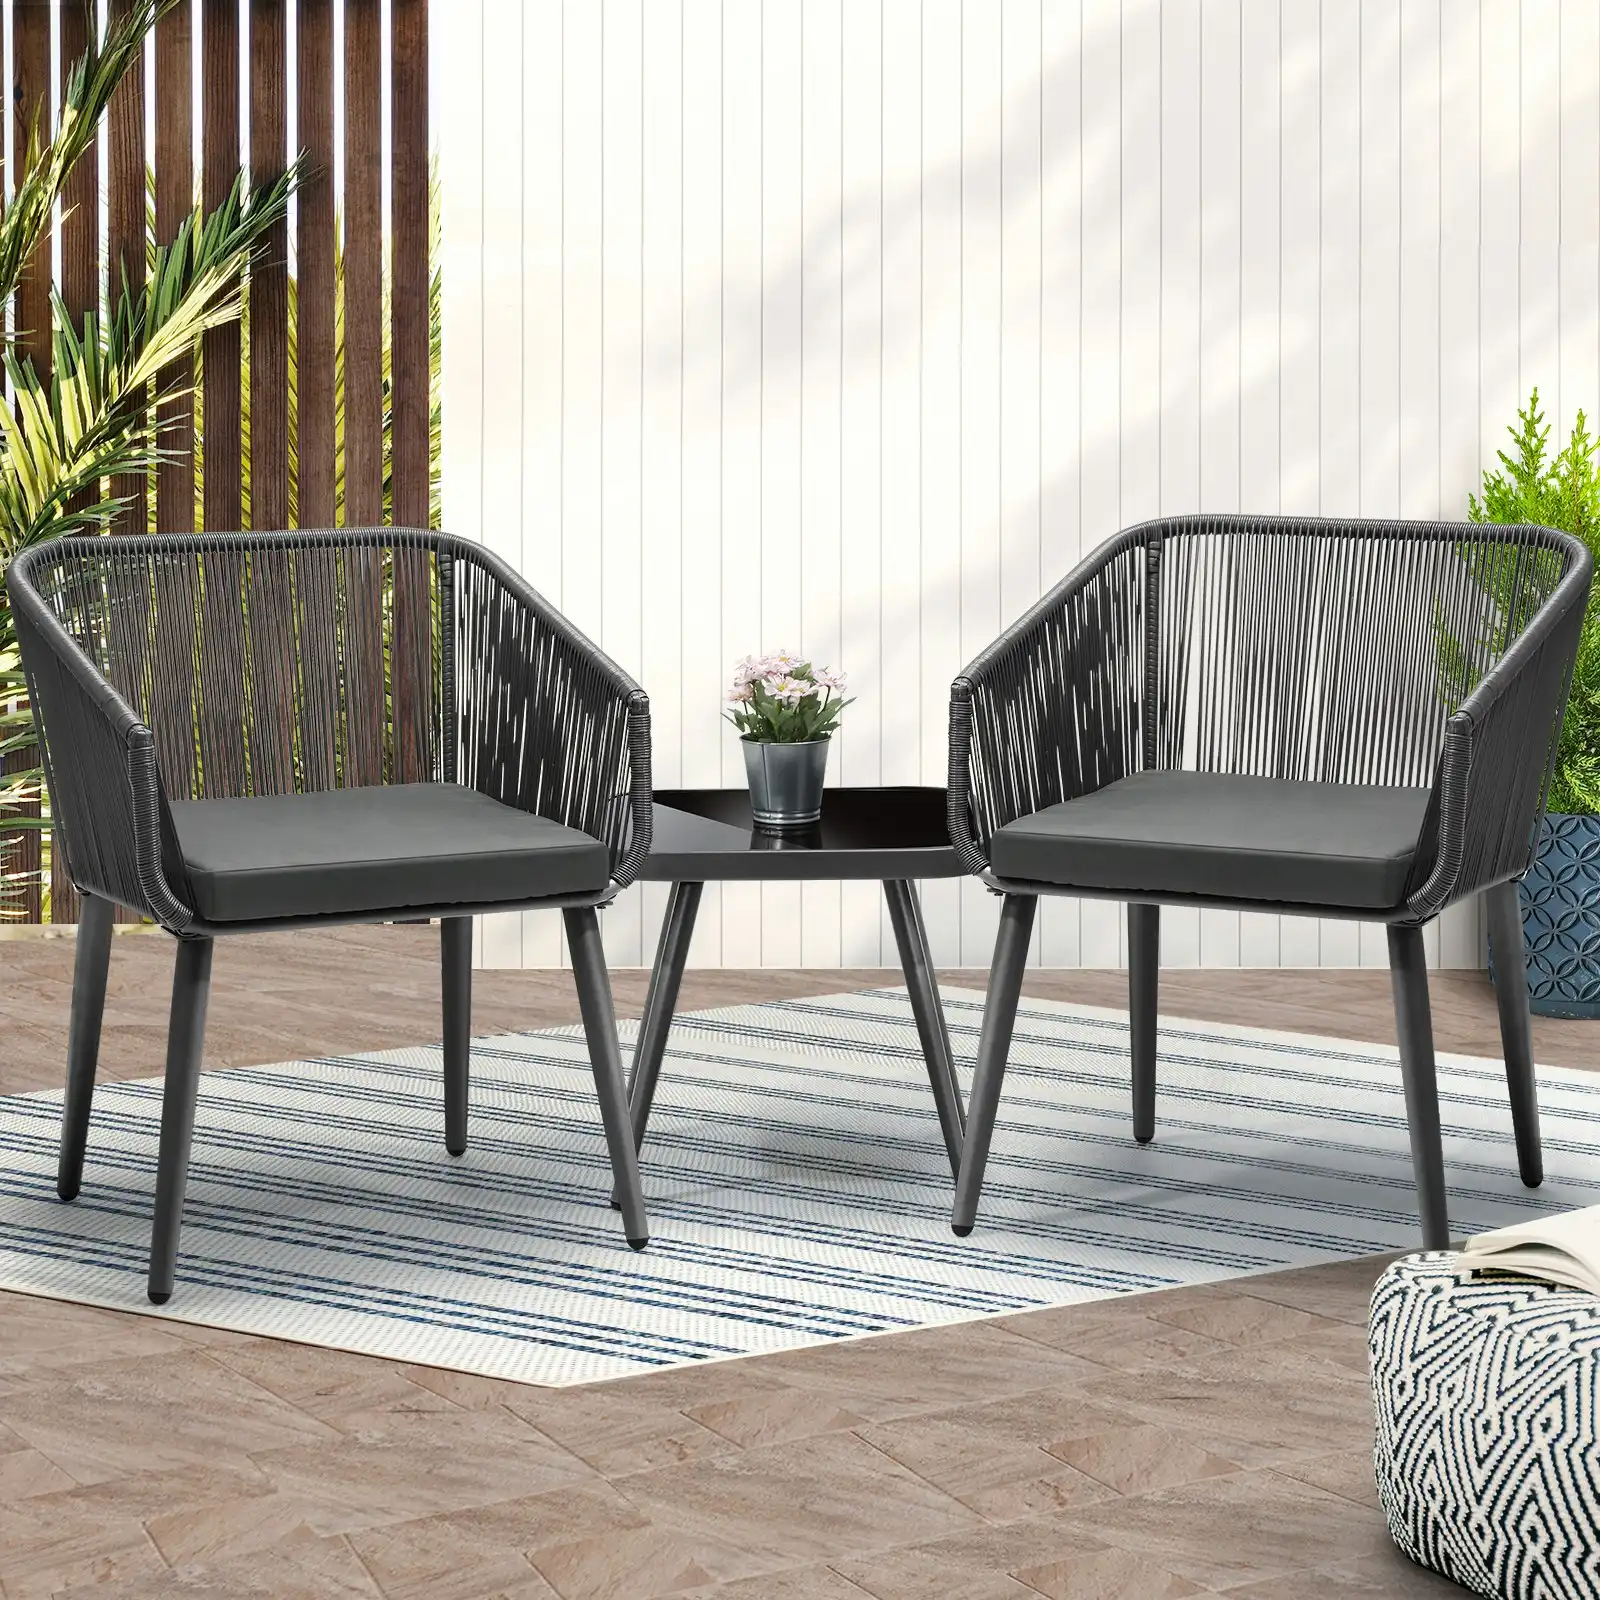 Livsip Outdoor Furniture 3 Piece Lounge Setting Chairs Side Table Bistro Set Patio